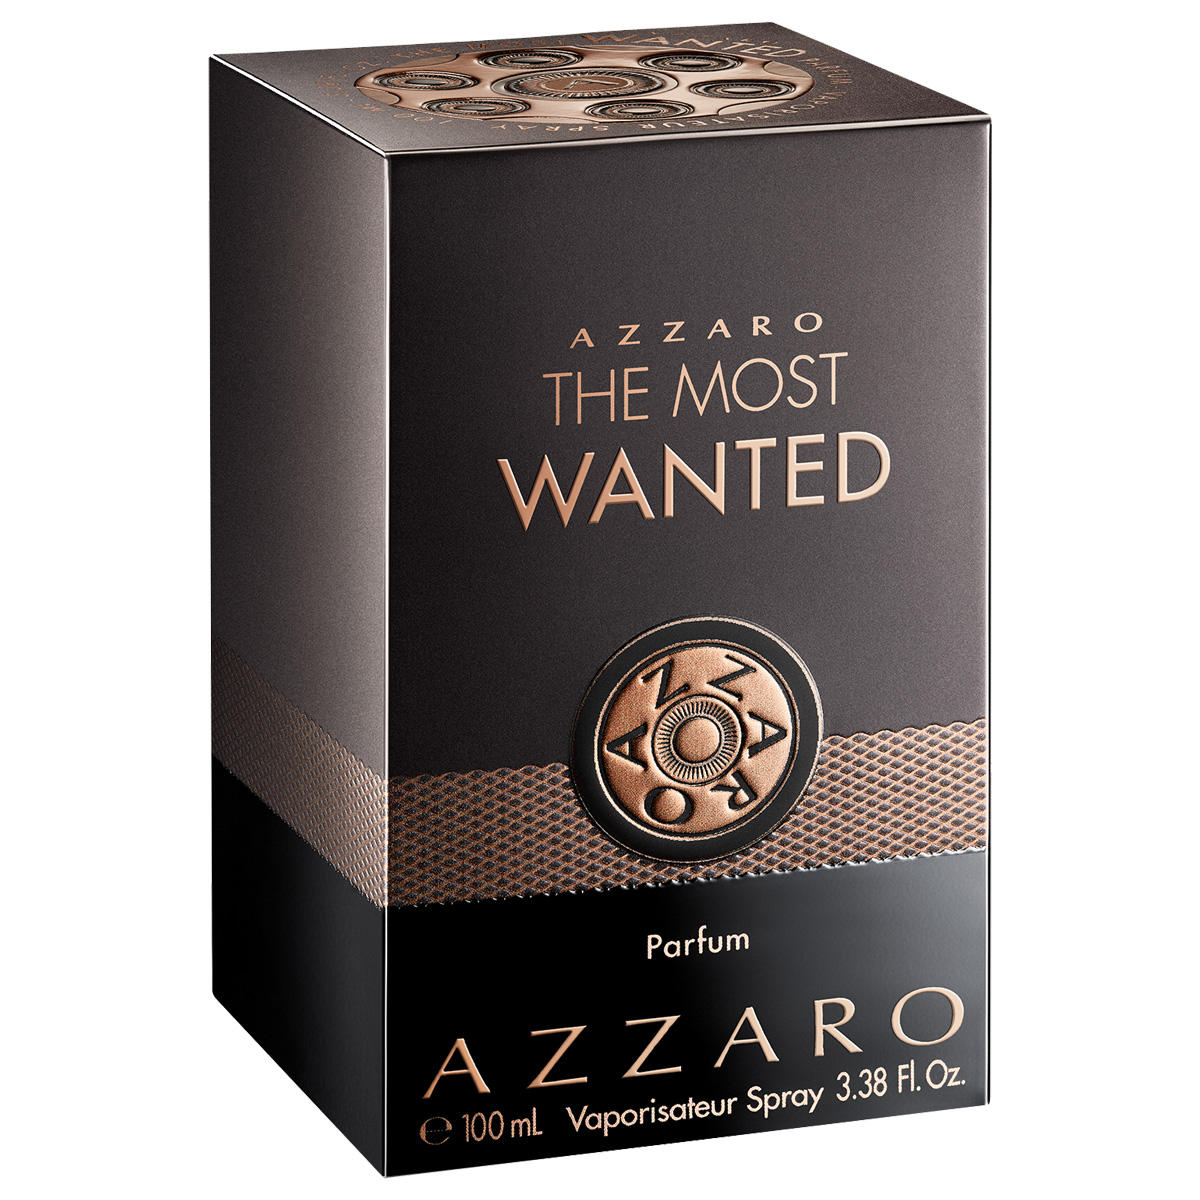 Azzaro Wanted The Most Le Parfum 100 ml - 2